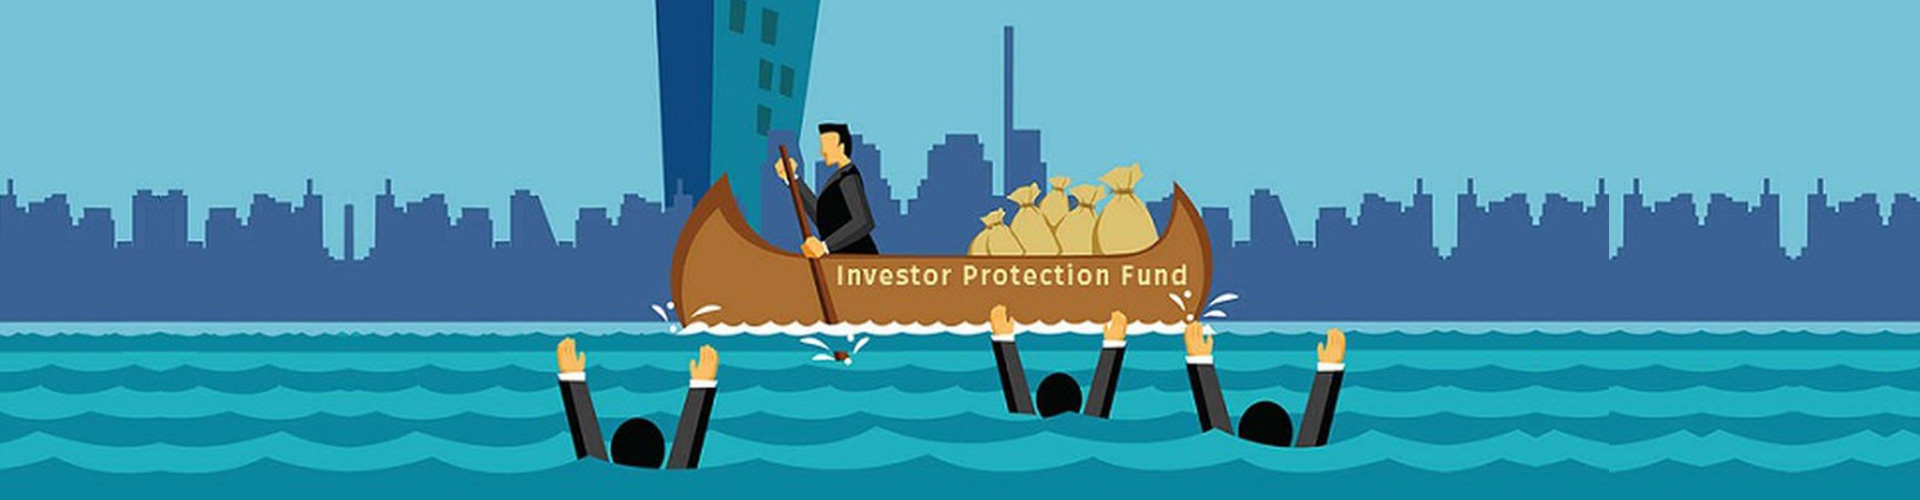 investors-education-and-protection-fund-4.jpg